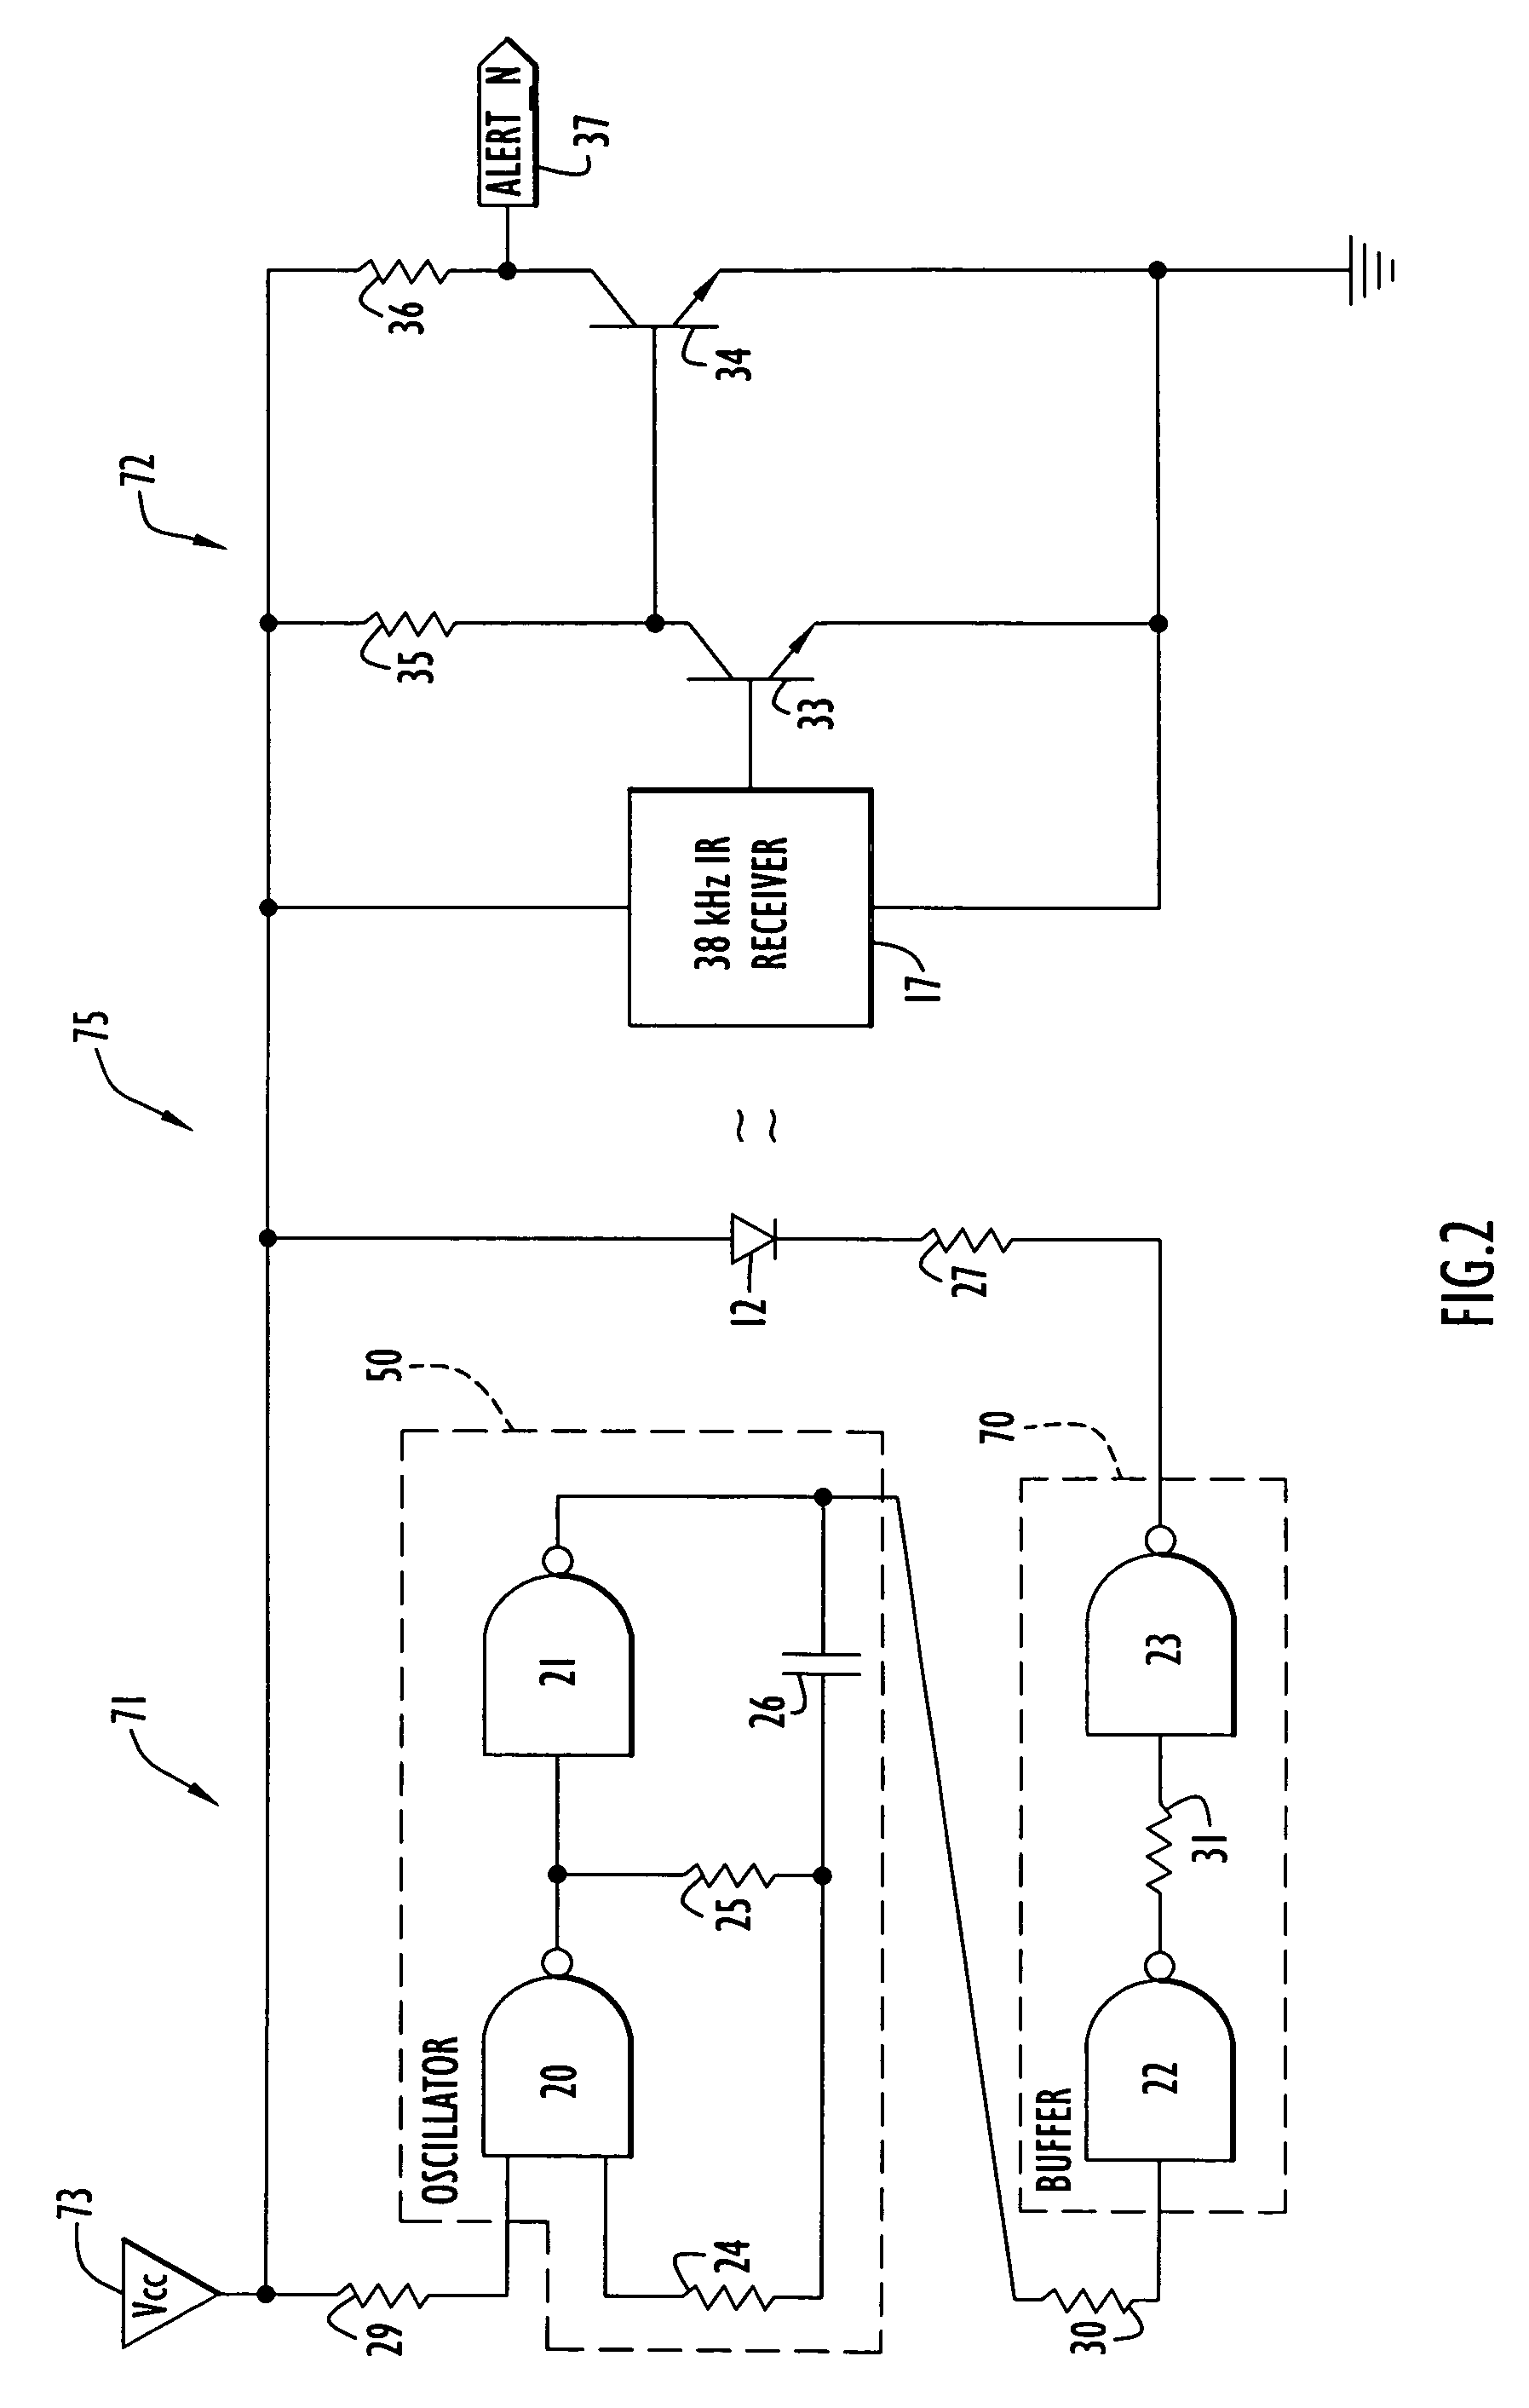 Method and apparatus for monitoring handling of a firearm